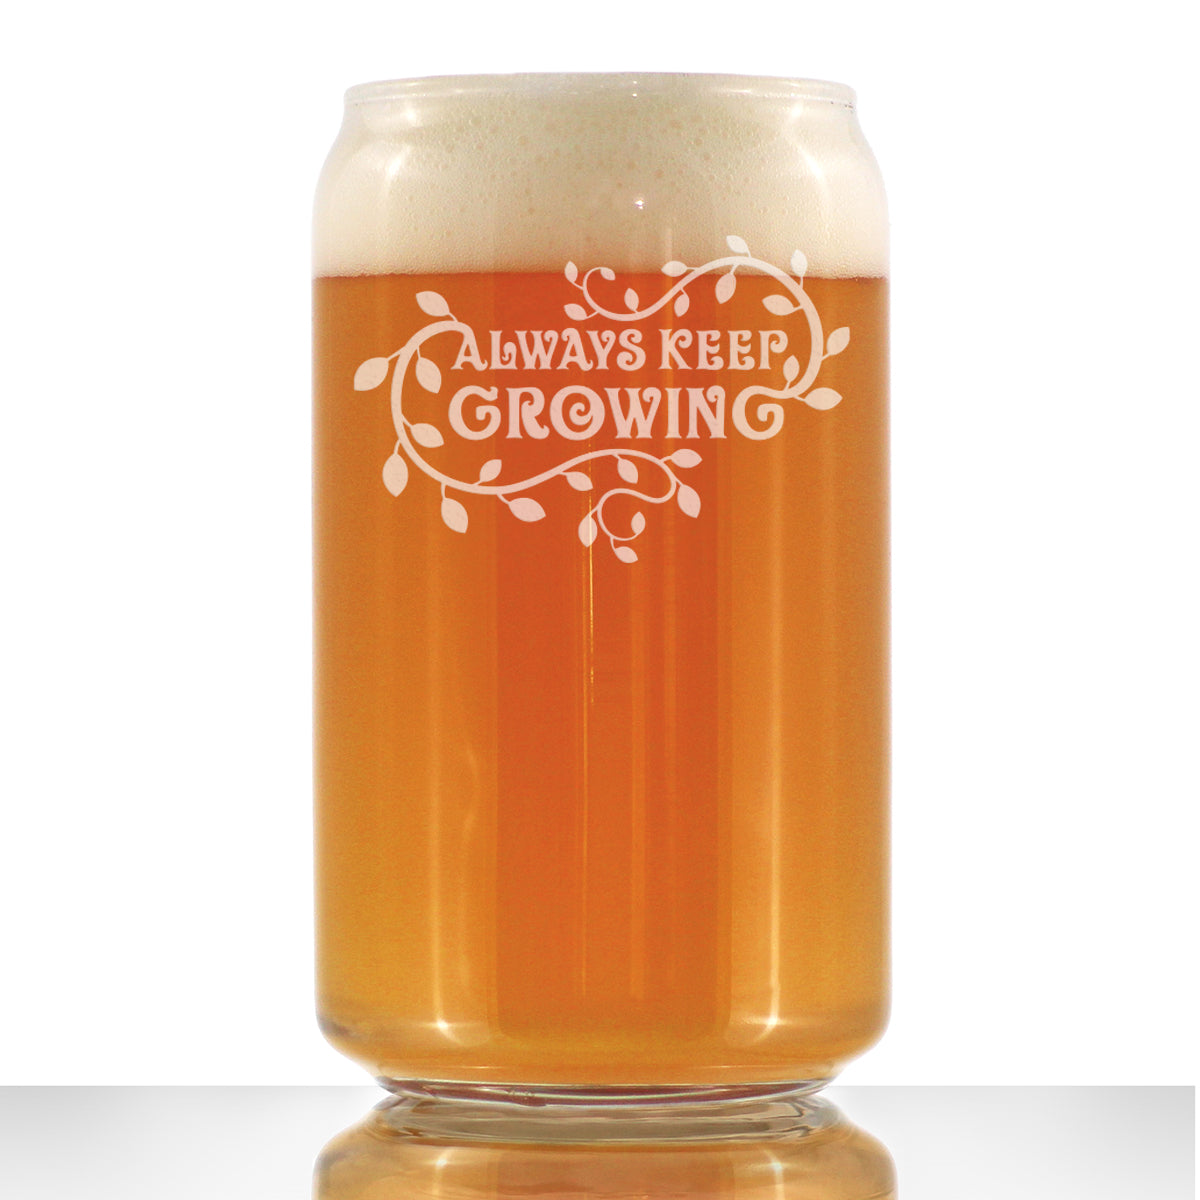 Keep Growing - Beer Can Pint Glass - Gardening Themed Gifts and Decor for Gardeners - 16 oz Glass